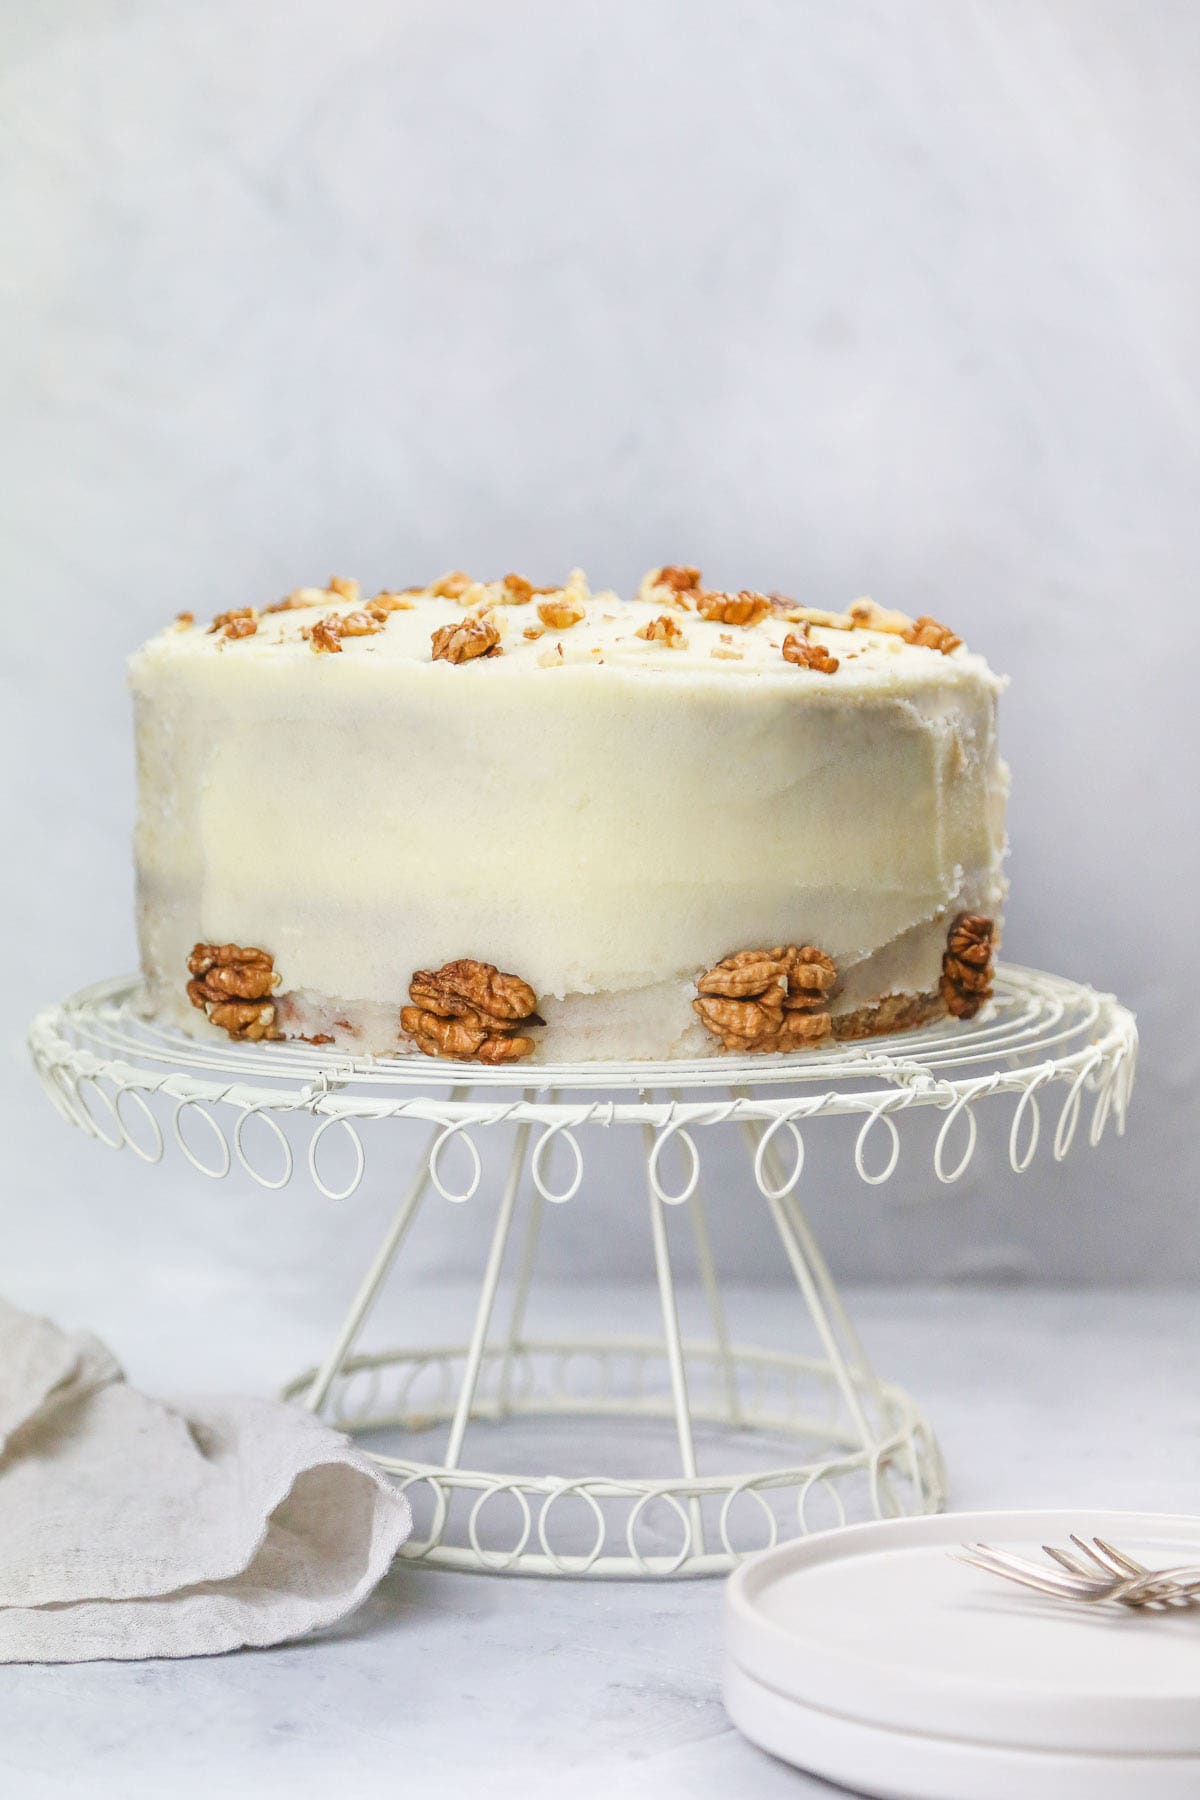 Frosted banana cake on a wired cake stand with walnuts